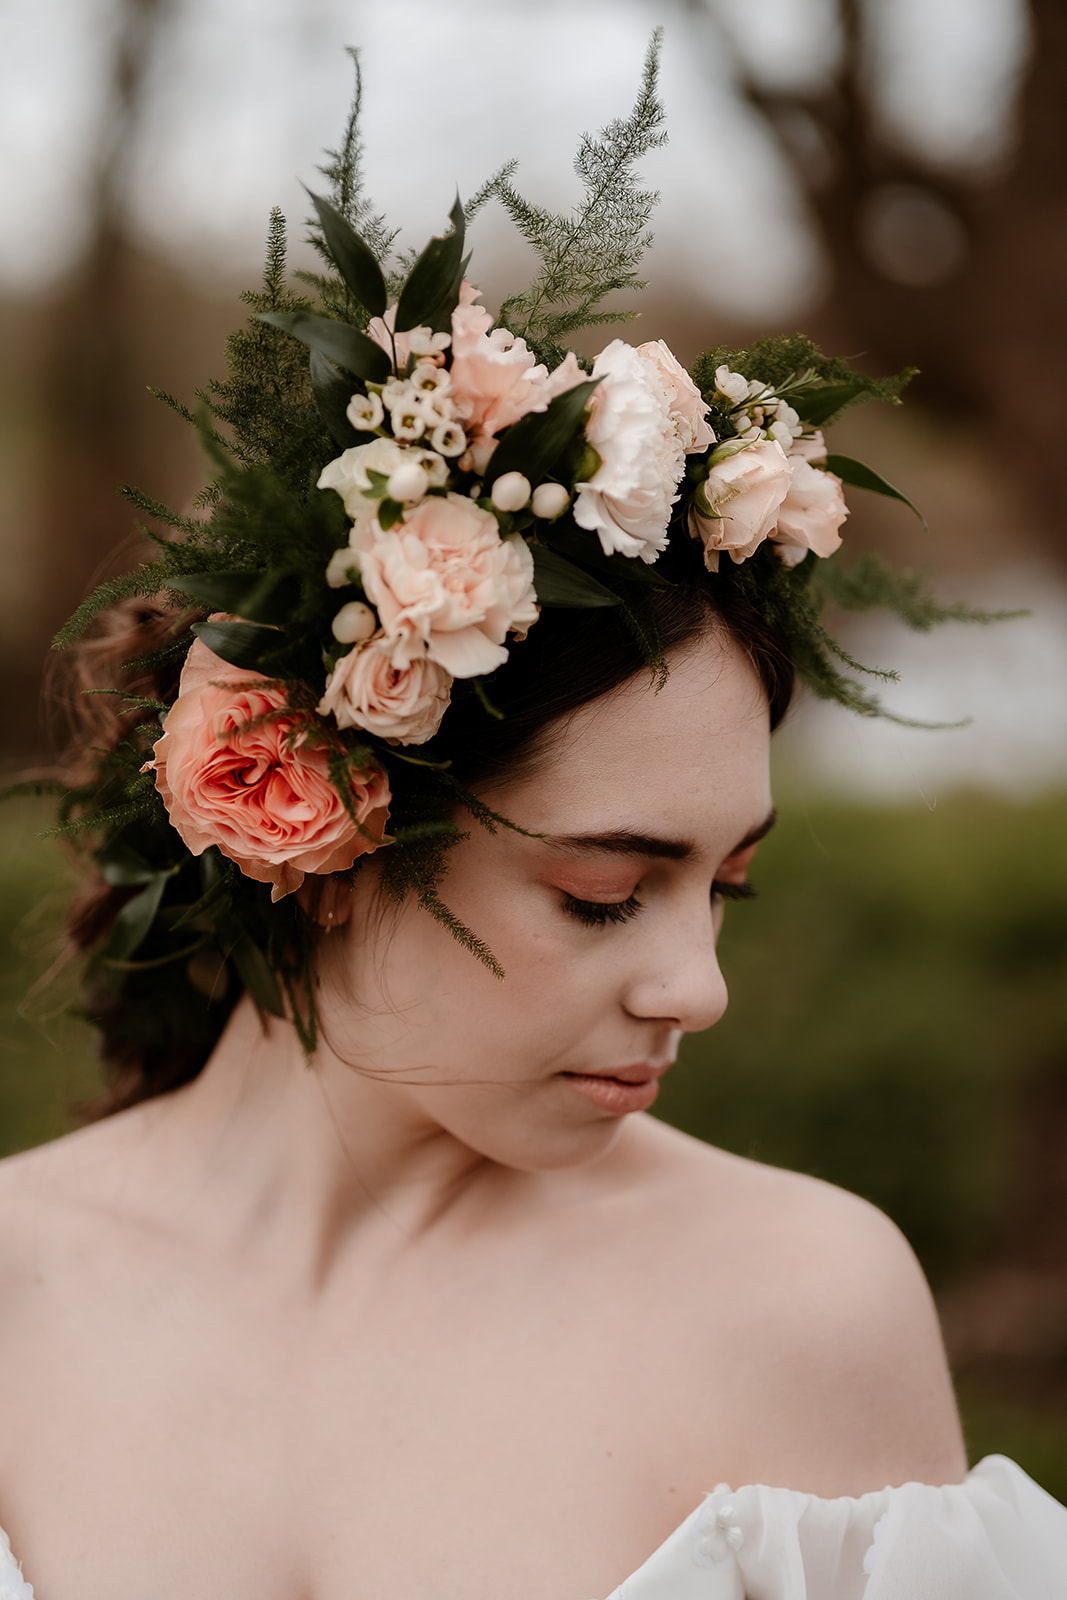 Head and shoulders shot of a bride wearing a large flower crown with peach flowers